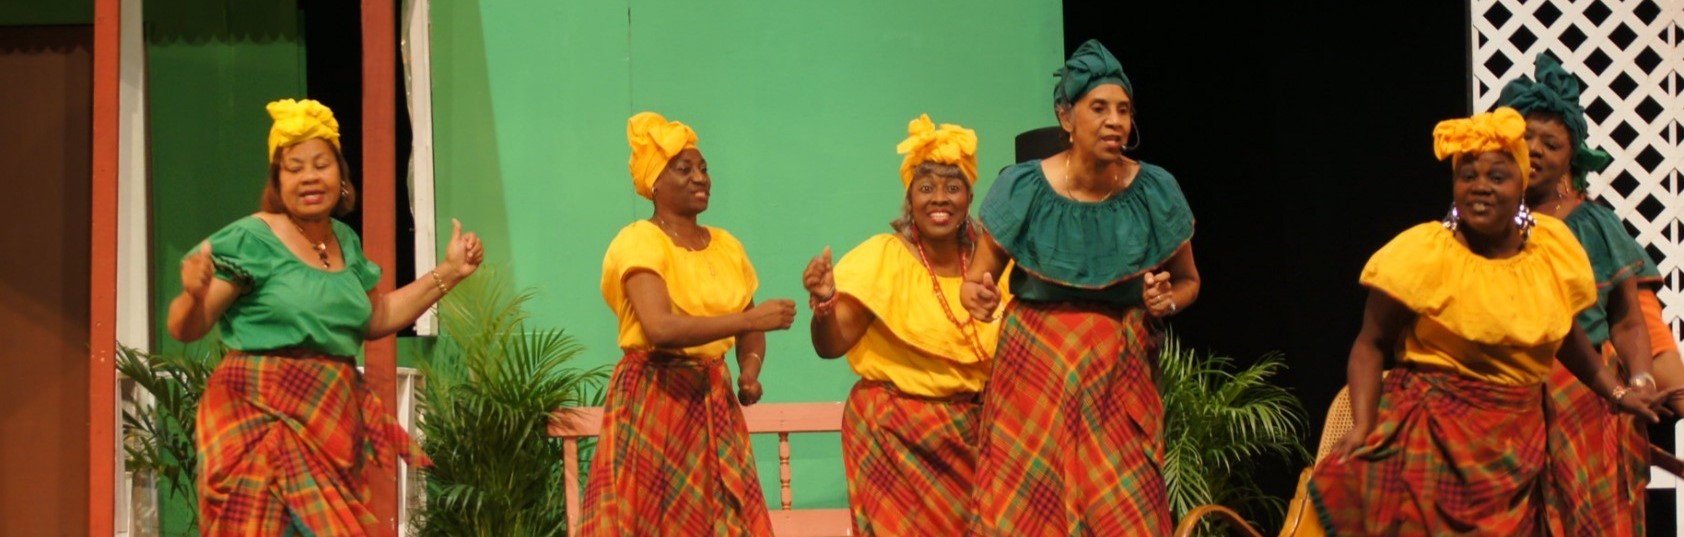 Louise Bennett-Coverley Heritage Council to stage Jamaican Pantomime ‘Ol’ Time Sinting Come Back Again’ at Lauderhill Performing Arts Center